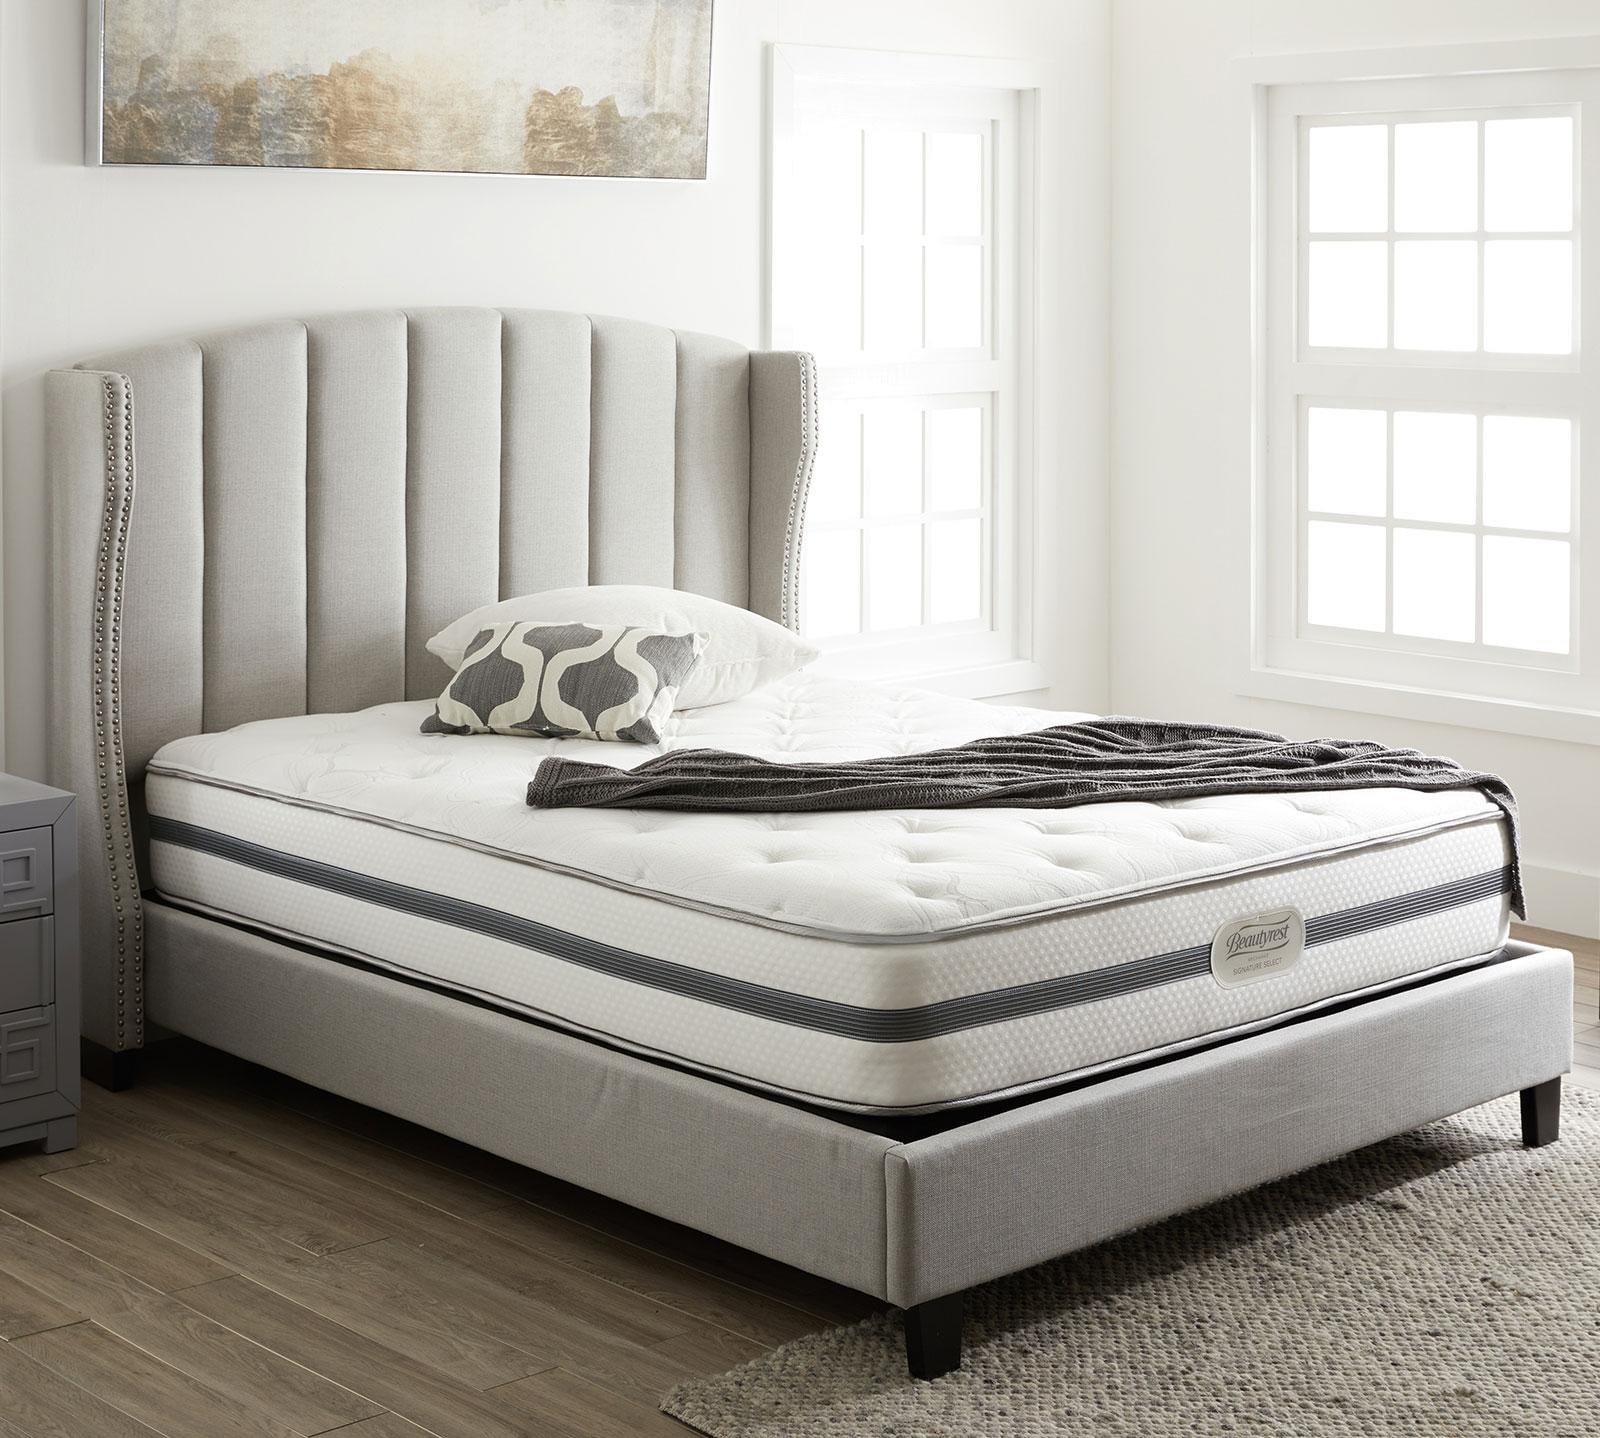 How to Choose A Mattress – An Easy Buying Guide